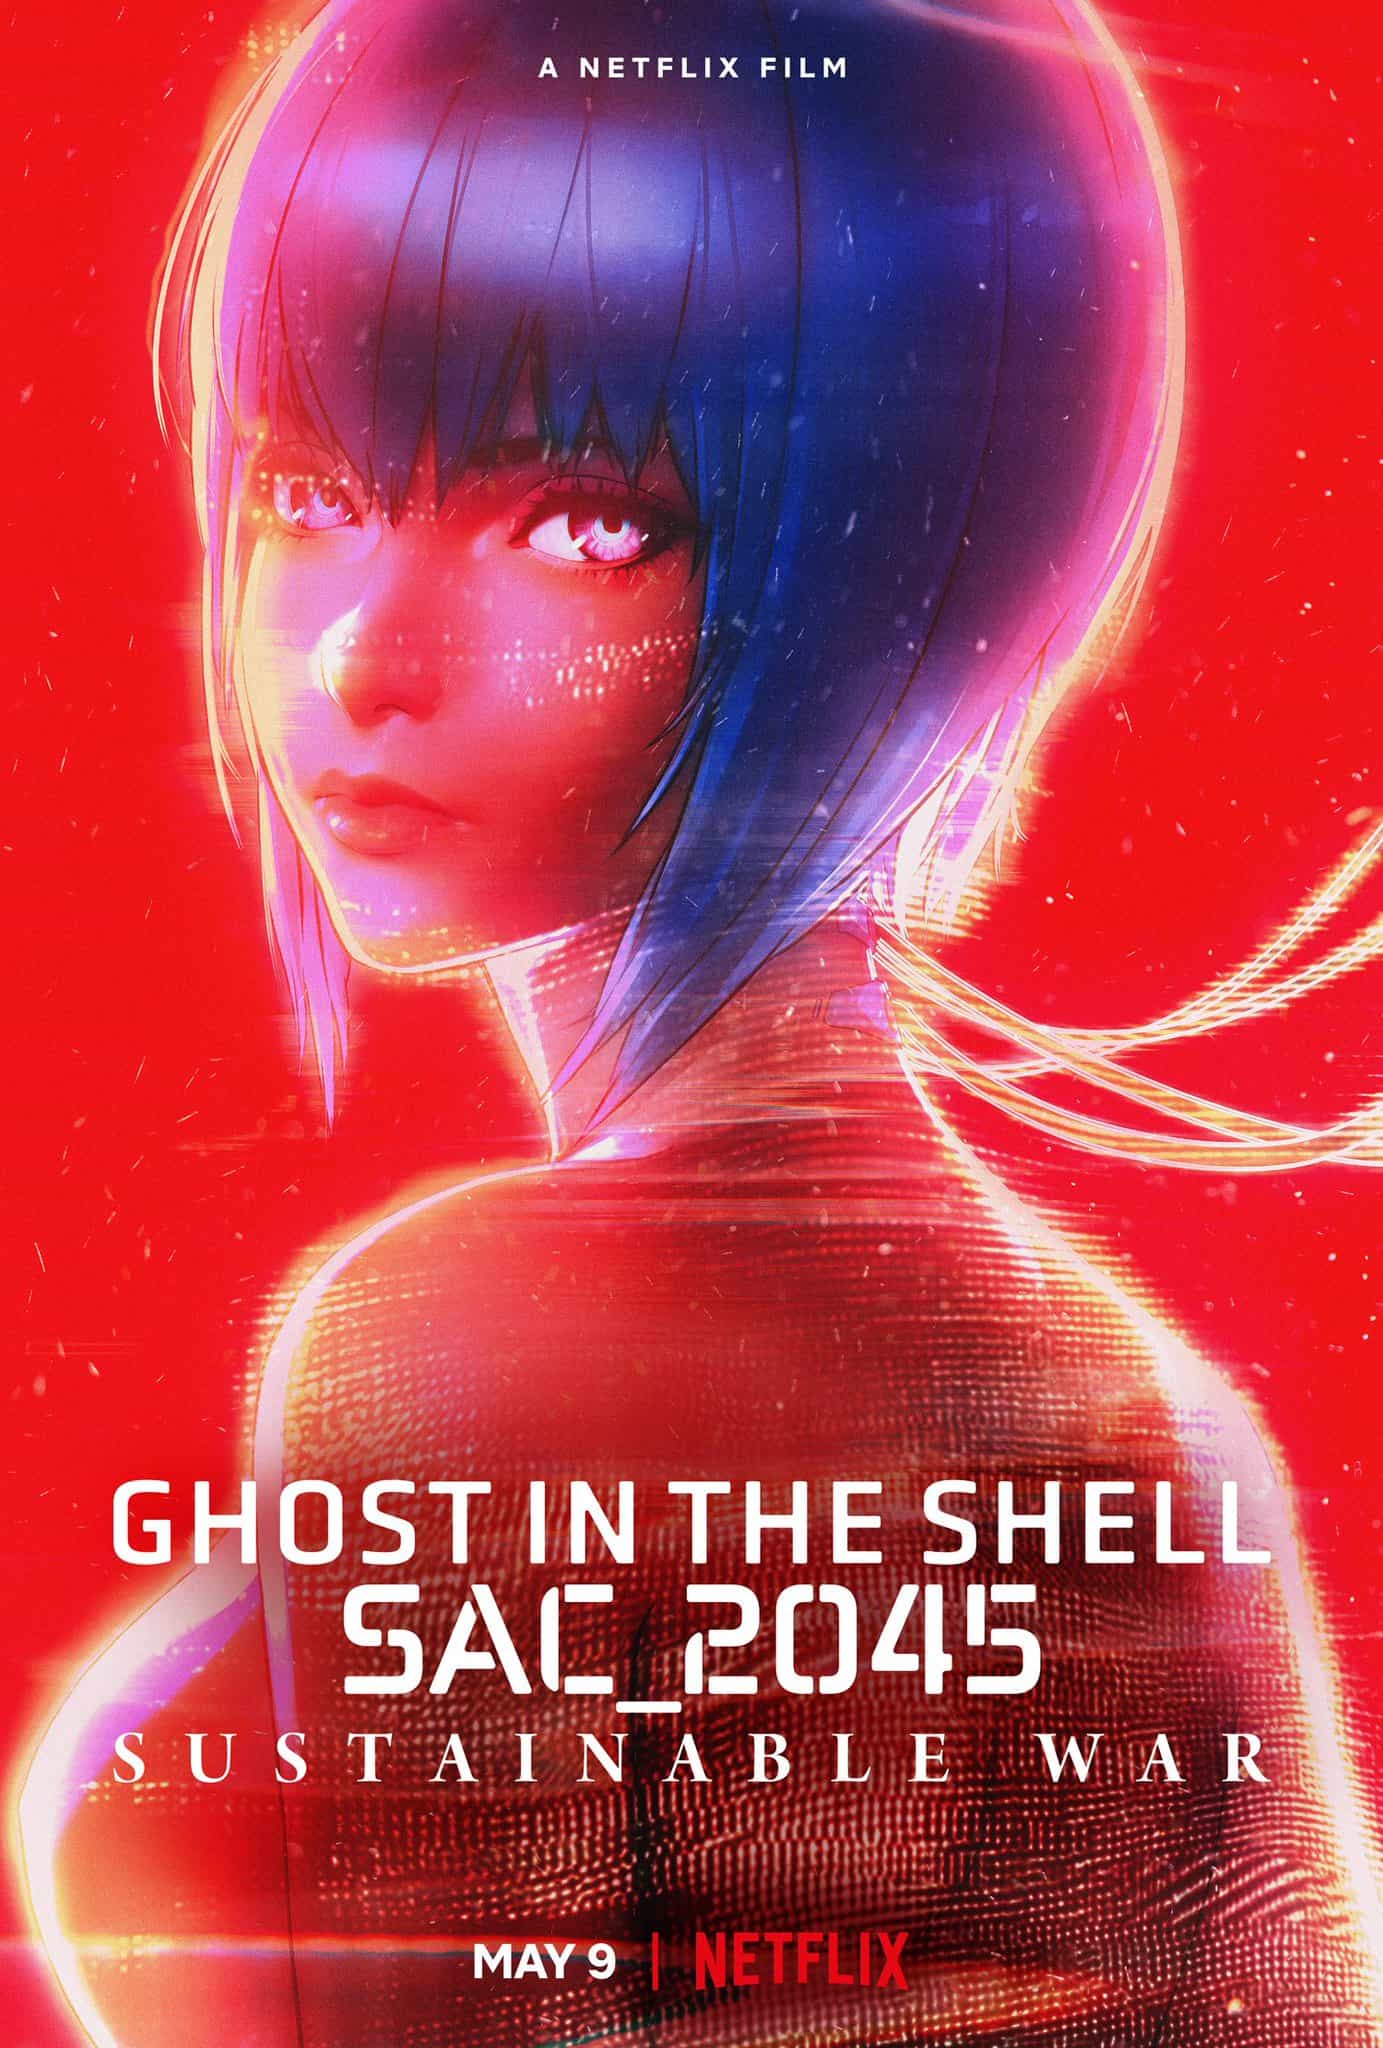 Ghost The Shell SAC 2045